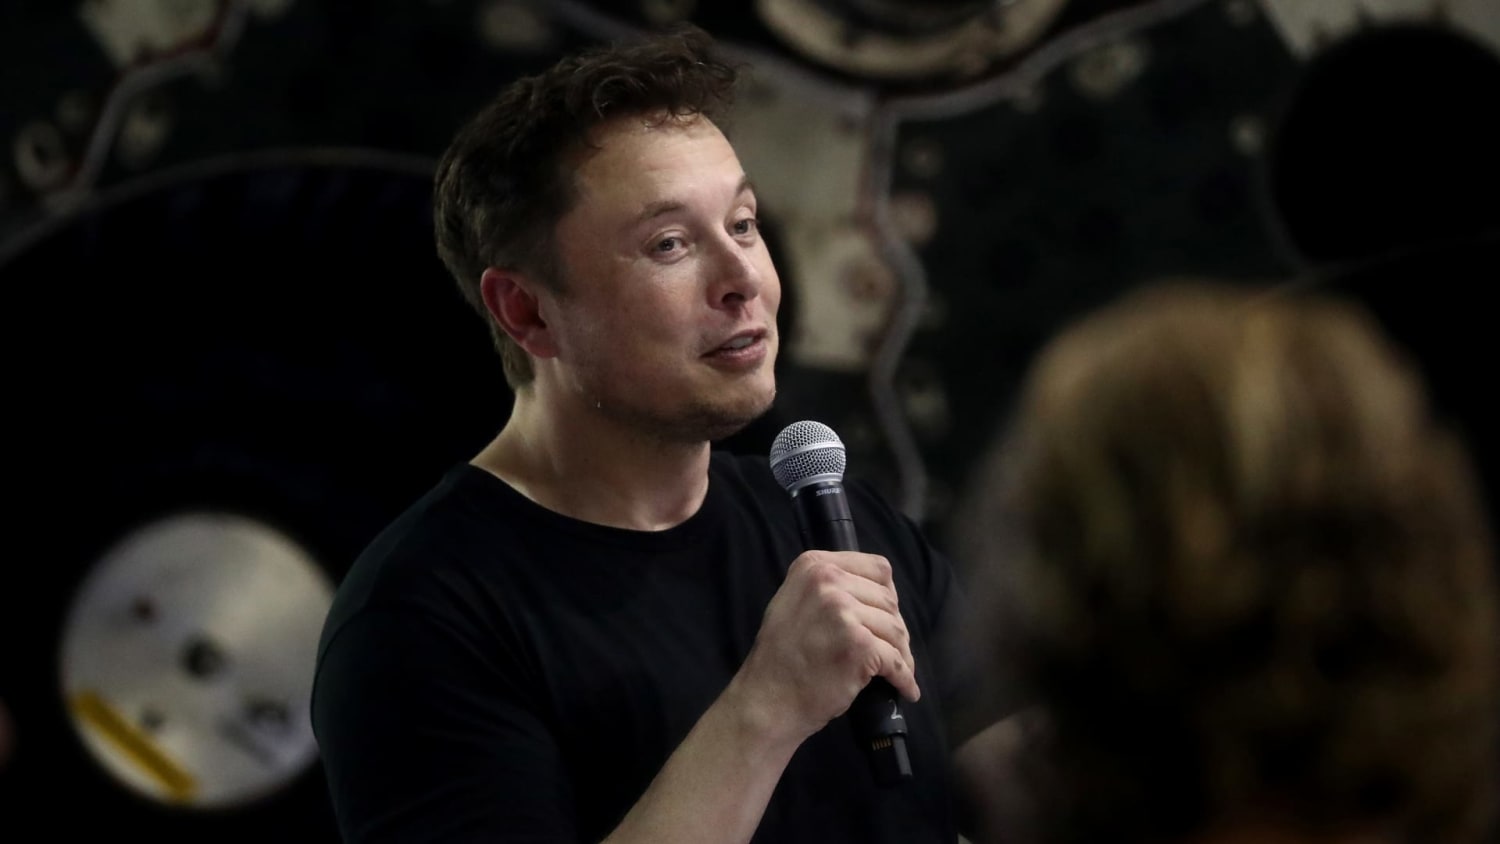 Elon Musk touts low cost to insure SpaceX rockets as edge over competitors